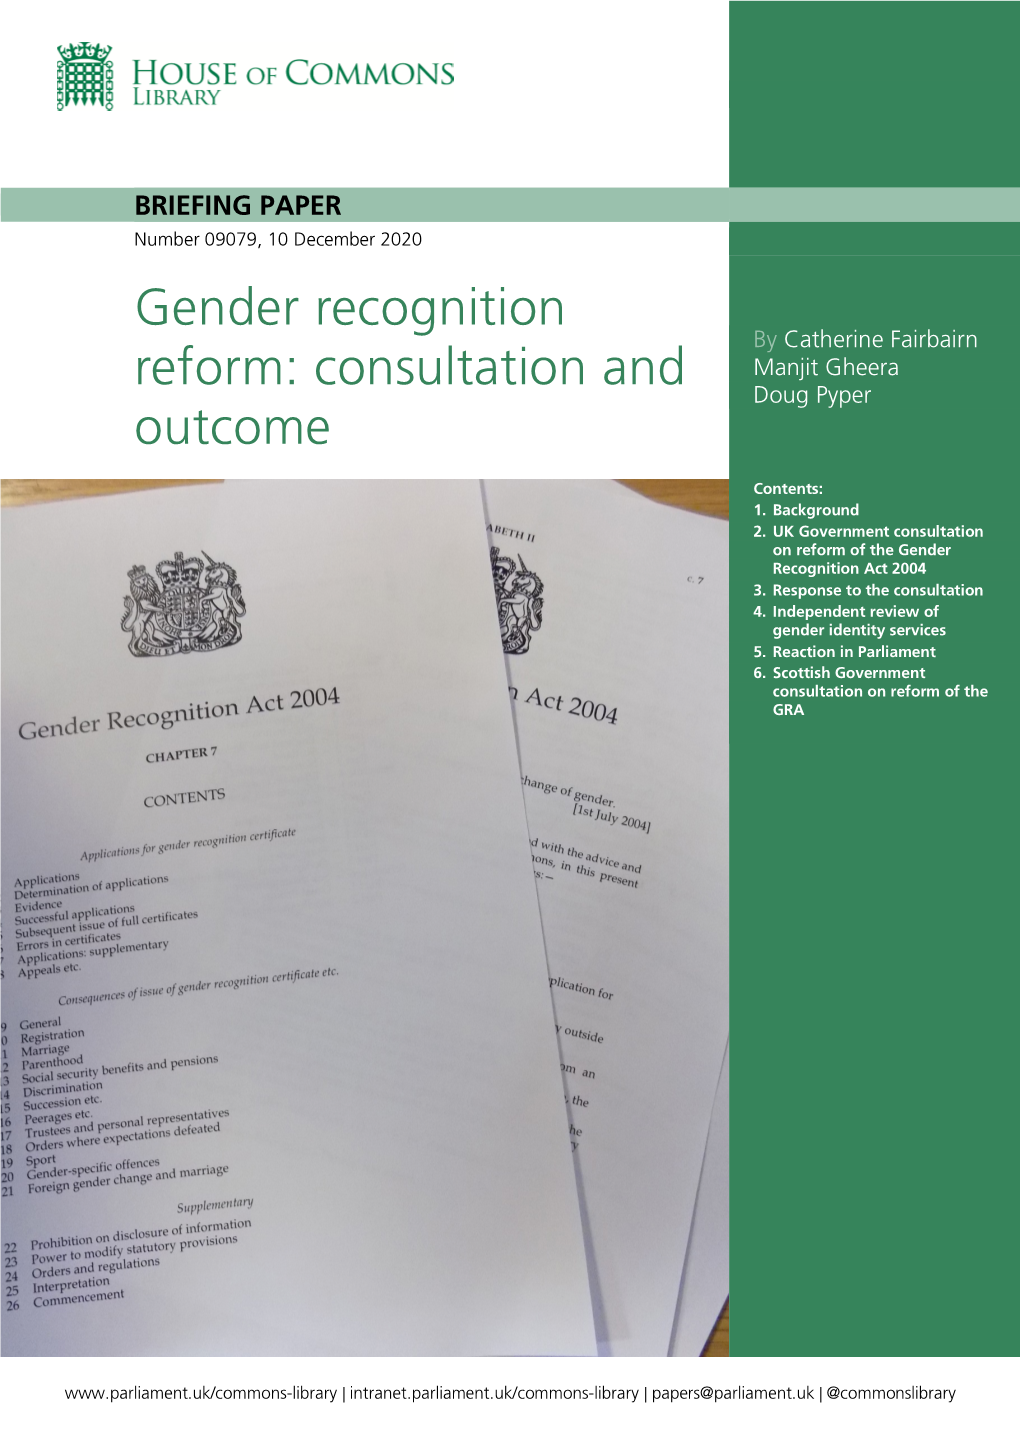 Gender Recognition Reform: Consultation and Outcome